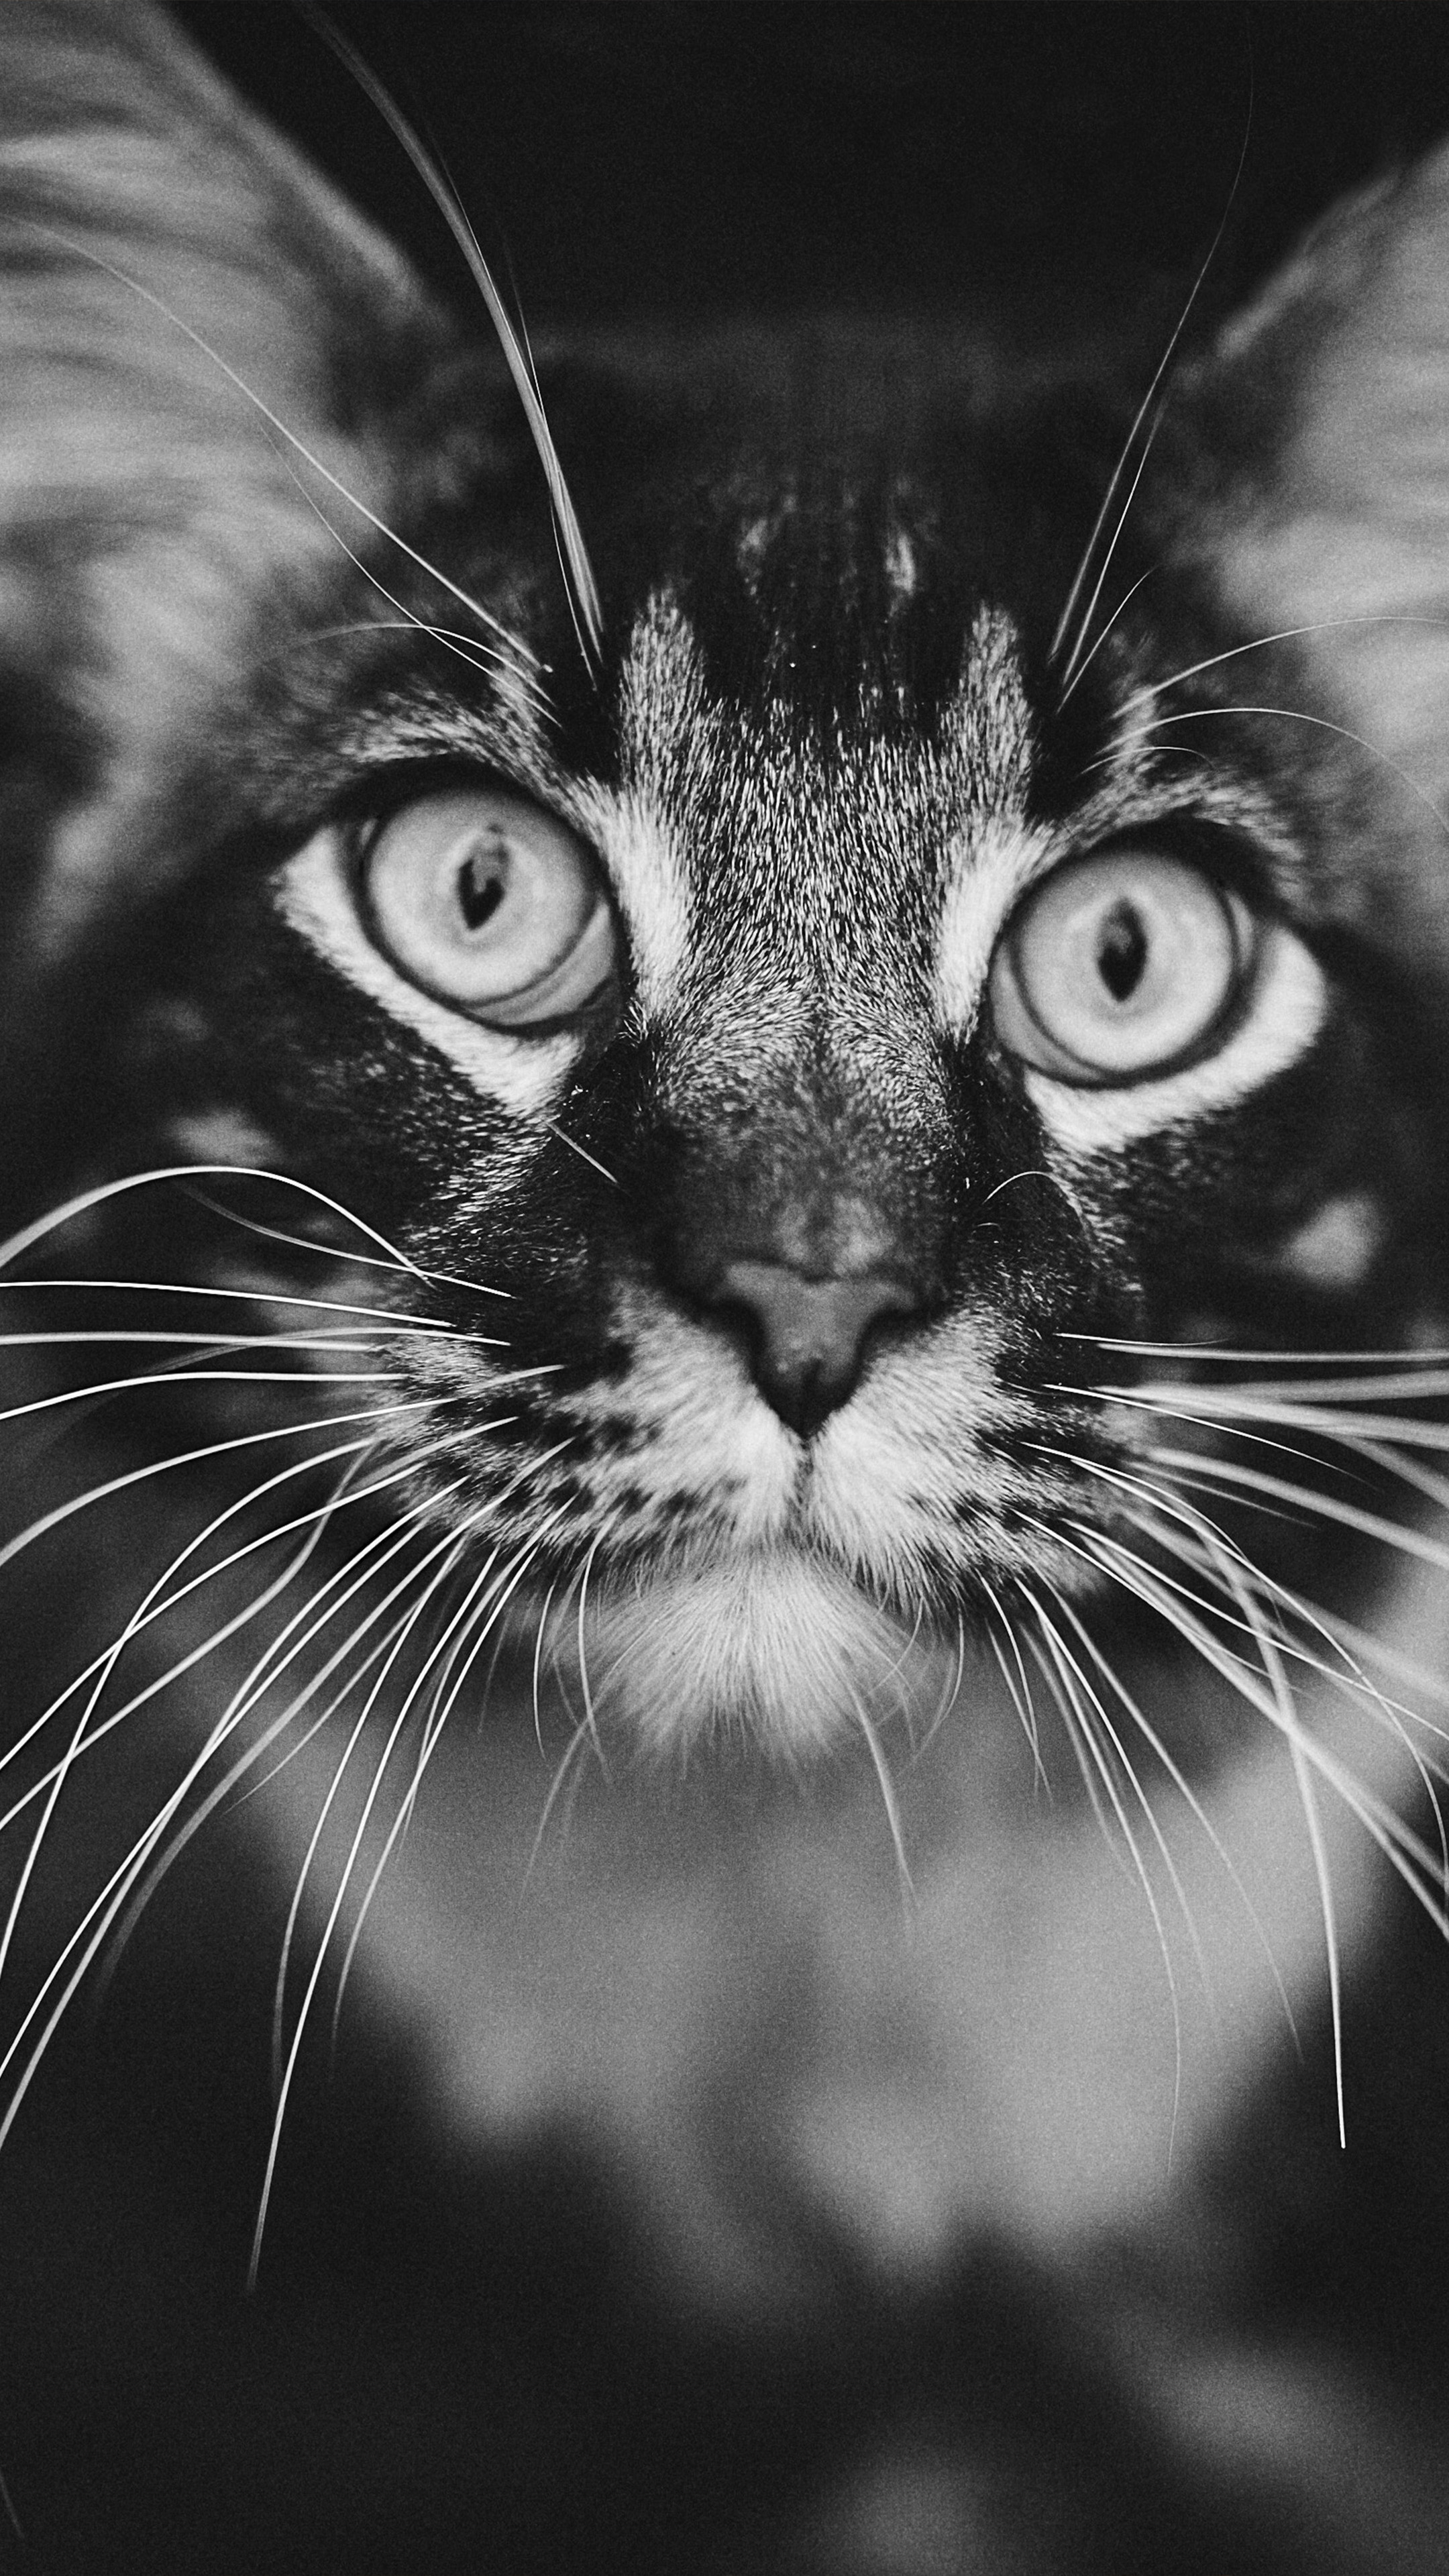 🔥 Free Download Staring Cat Black White 4k Ultra Hd Mobile Wallpaper 2160x3840 For Your